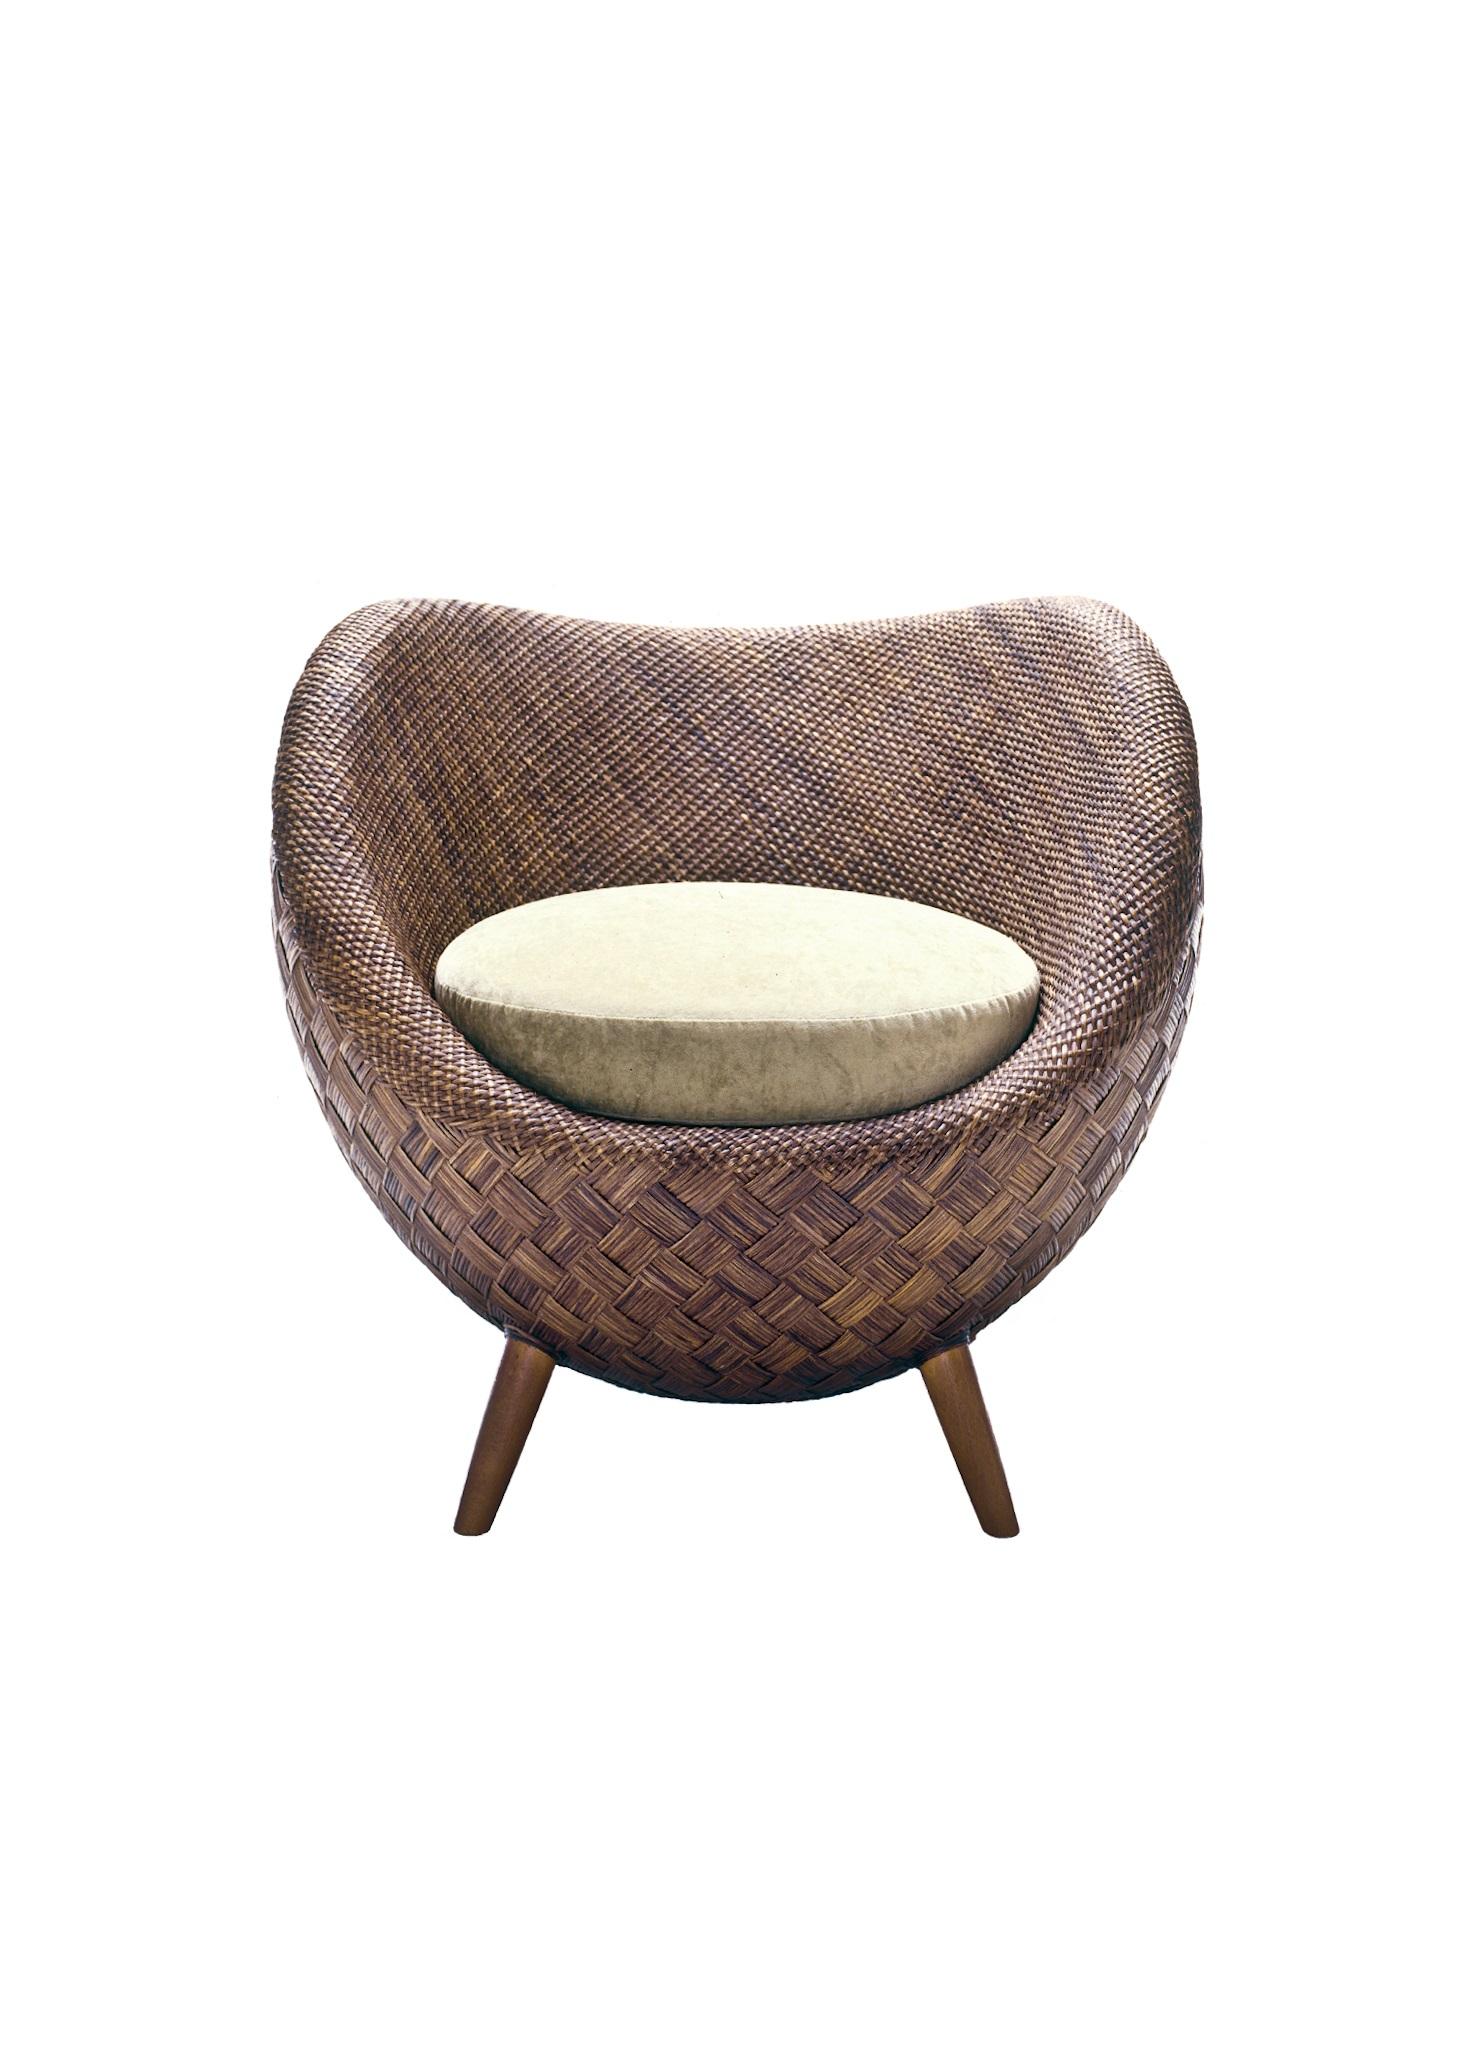 La Luna easy armchair by Kenneth Cobonpue
Materials: Rattan, polyurethane foam, maple. 
Also available in other colors. 
Dimensions: 75 cm x 77 cm x H 72 cm

La Luna’s quiet sophistication is defined by a soft, round shape that feels like a